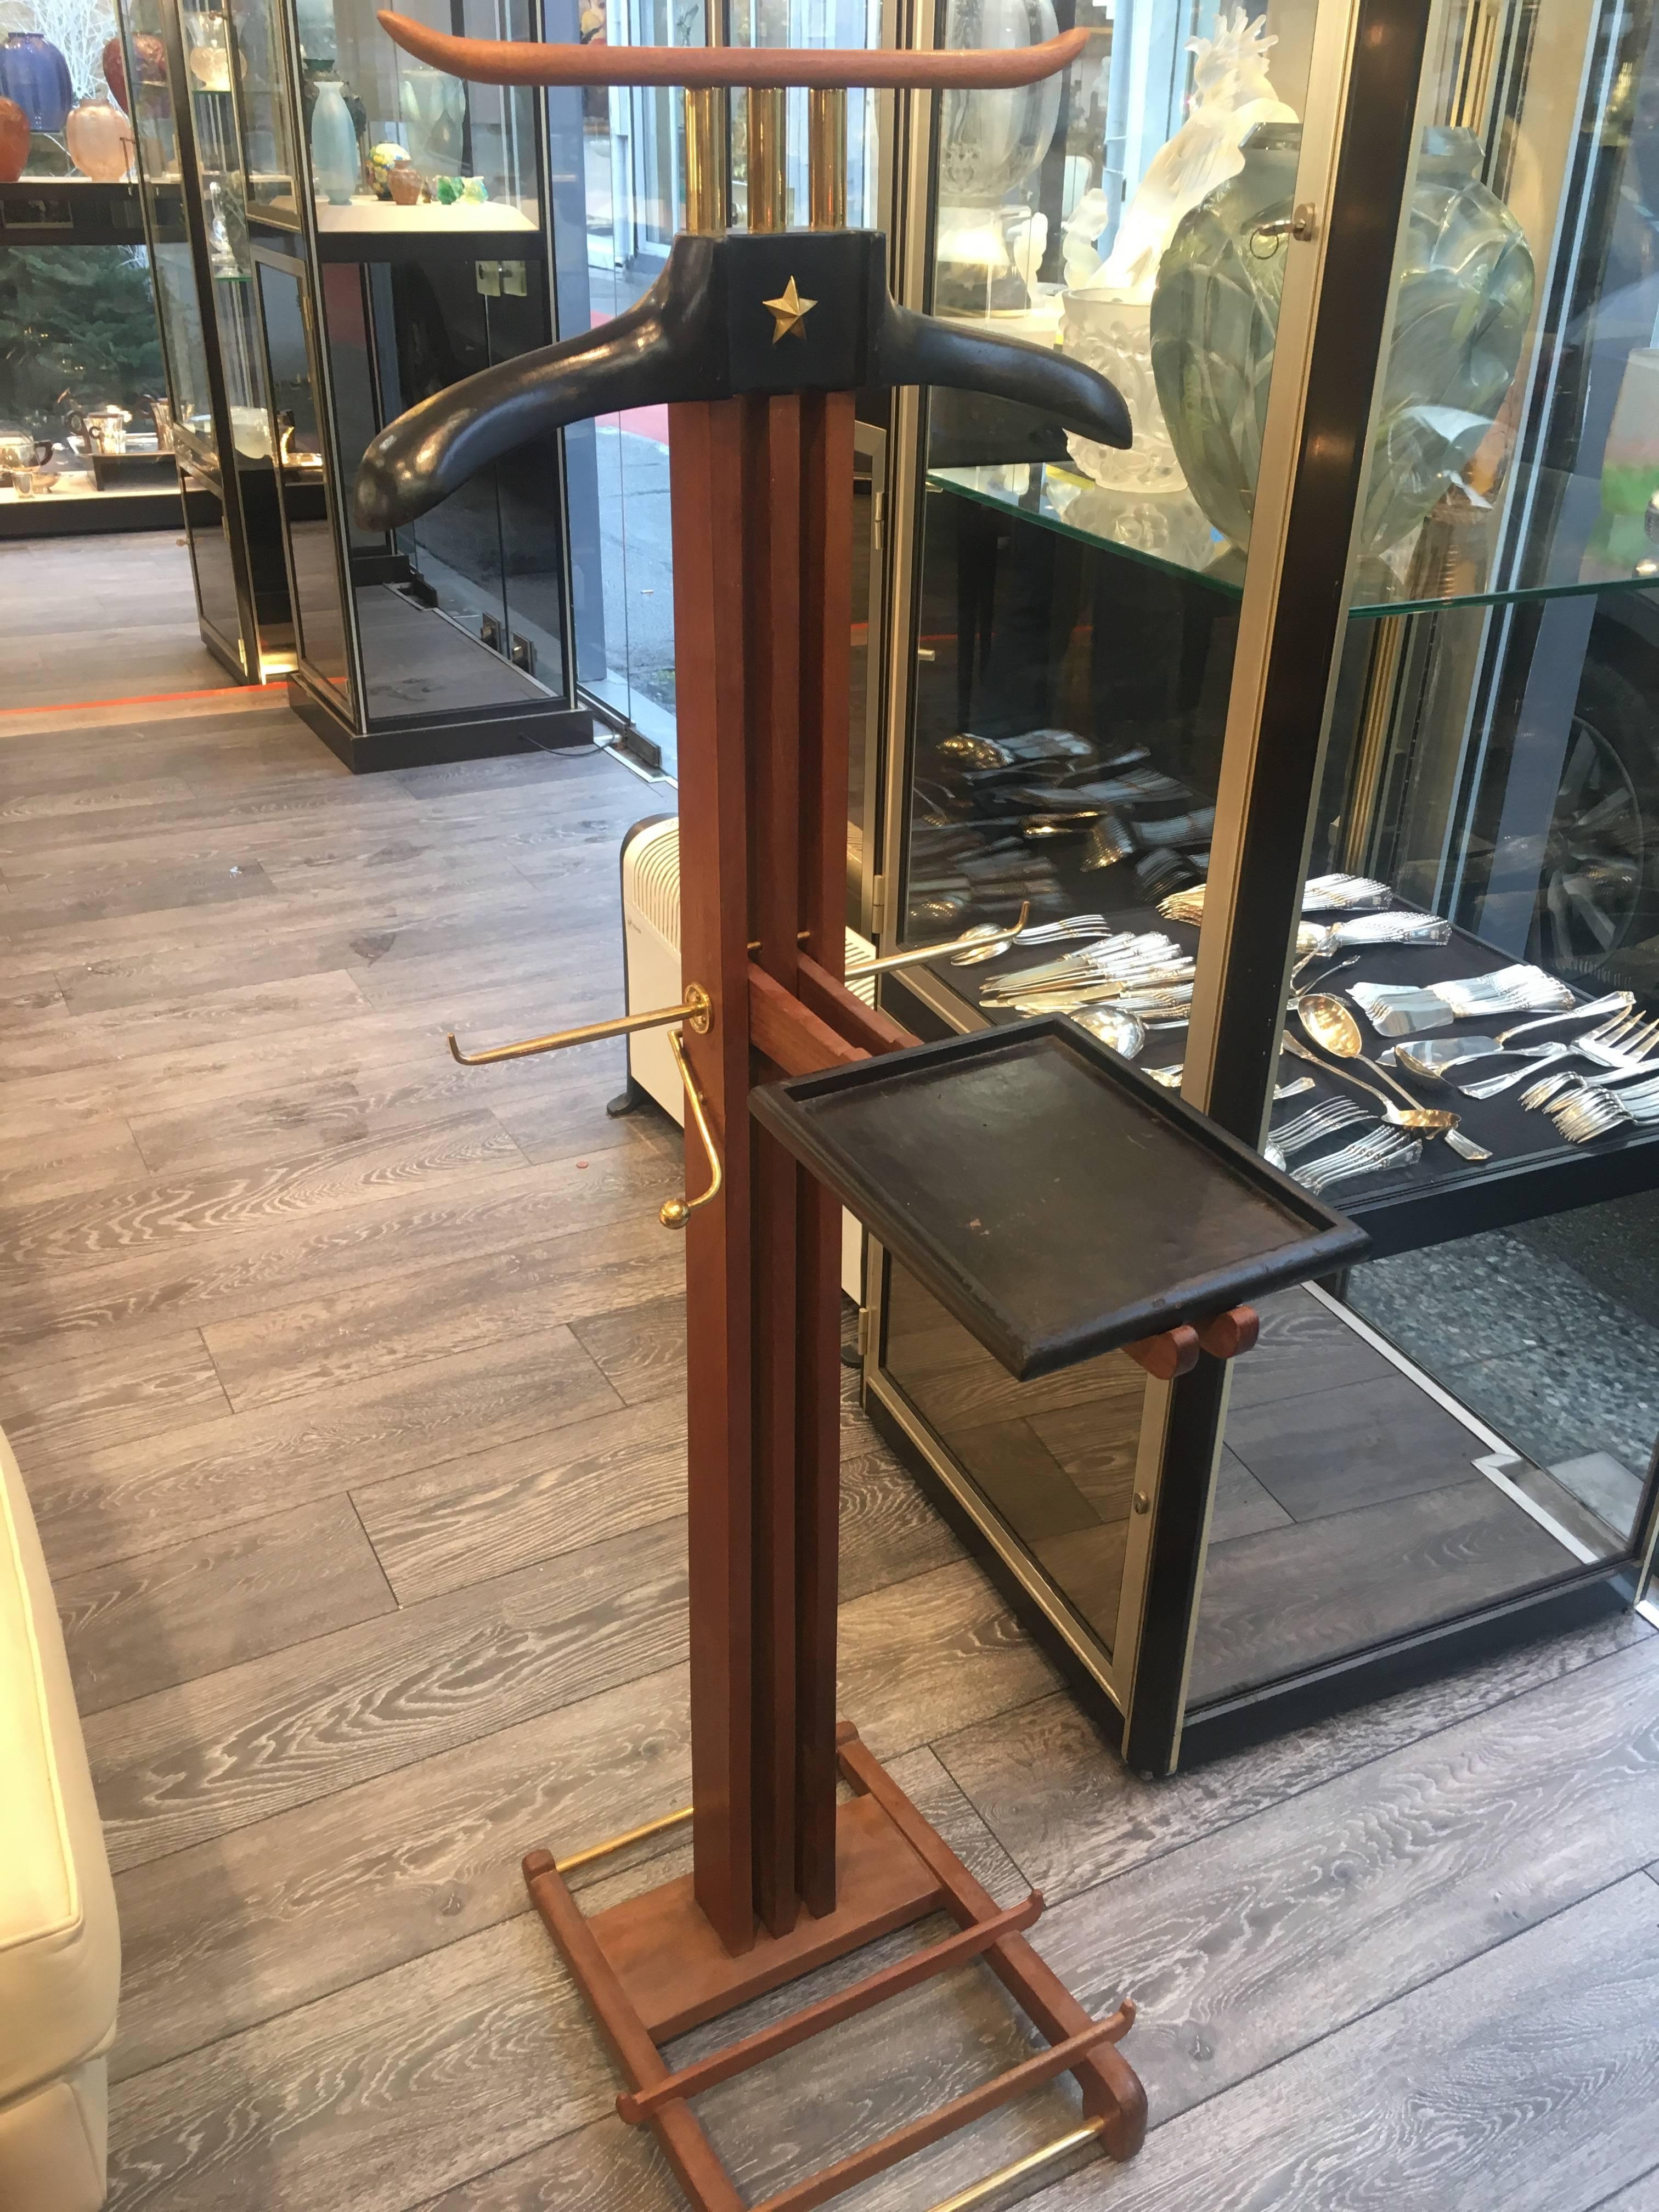 Night valet made out of all-wood mahogany. The shaft with its three studs decorated with an open work design receives within its centerline a small foldaway table covered in black leather. The clothe hanger made out of black leather is topped by